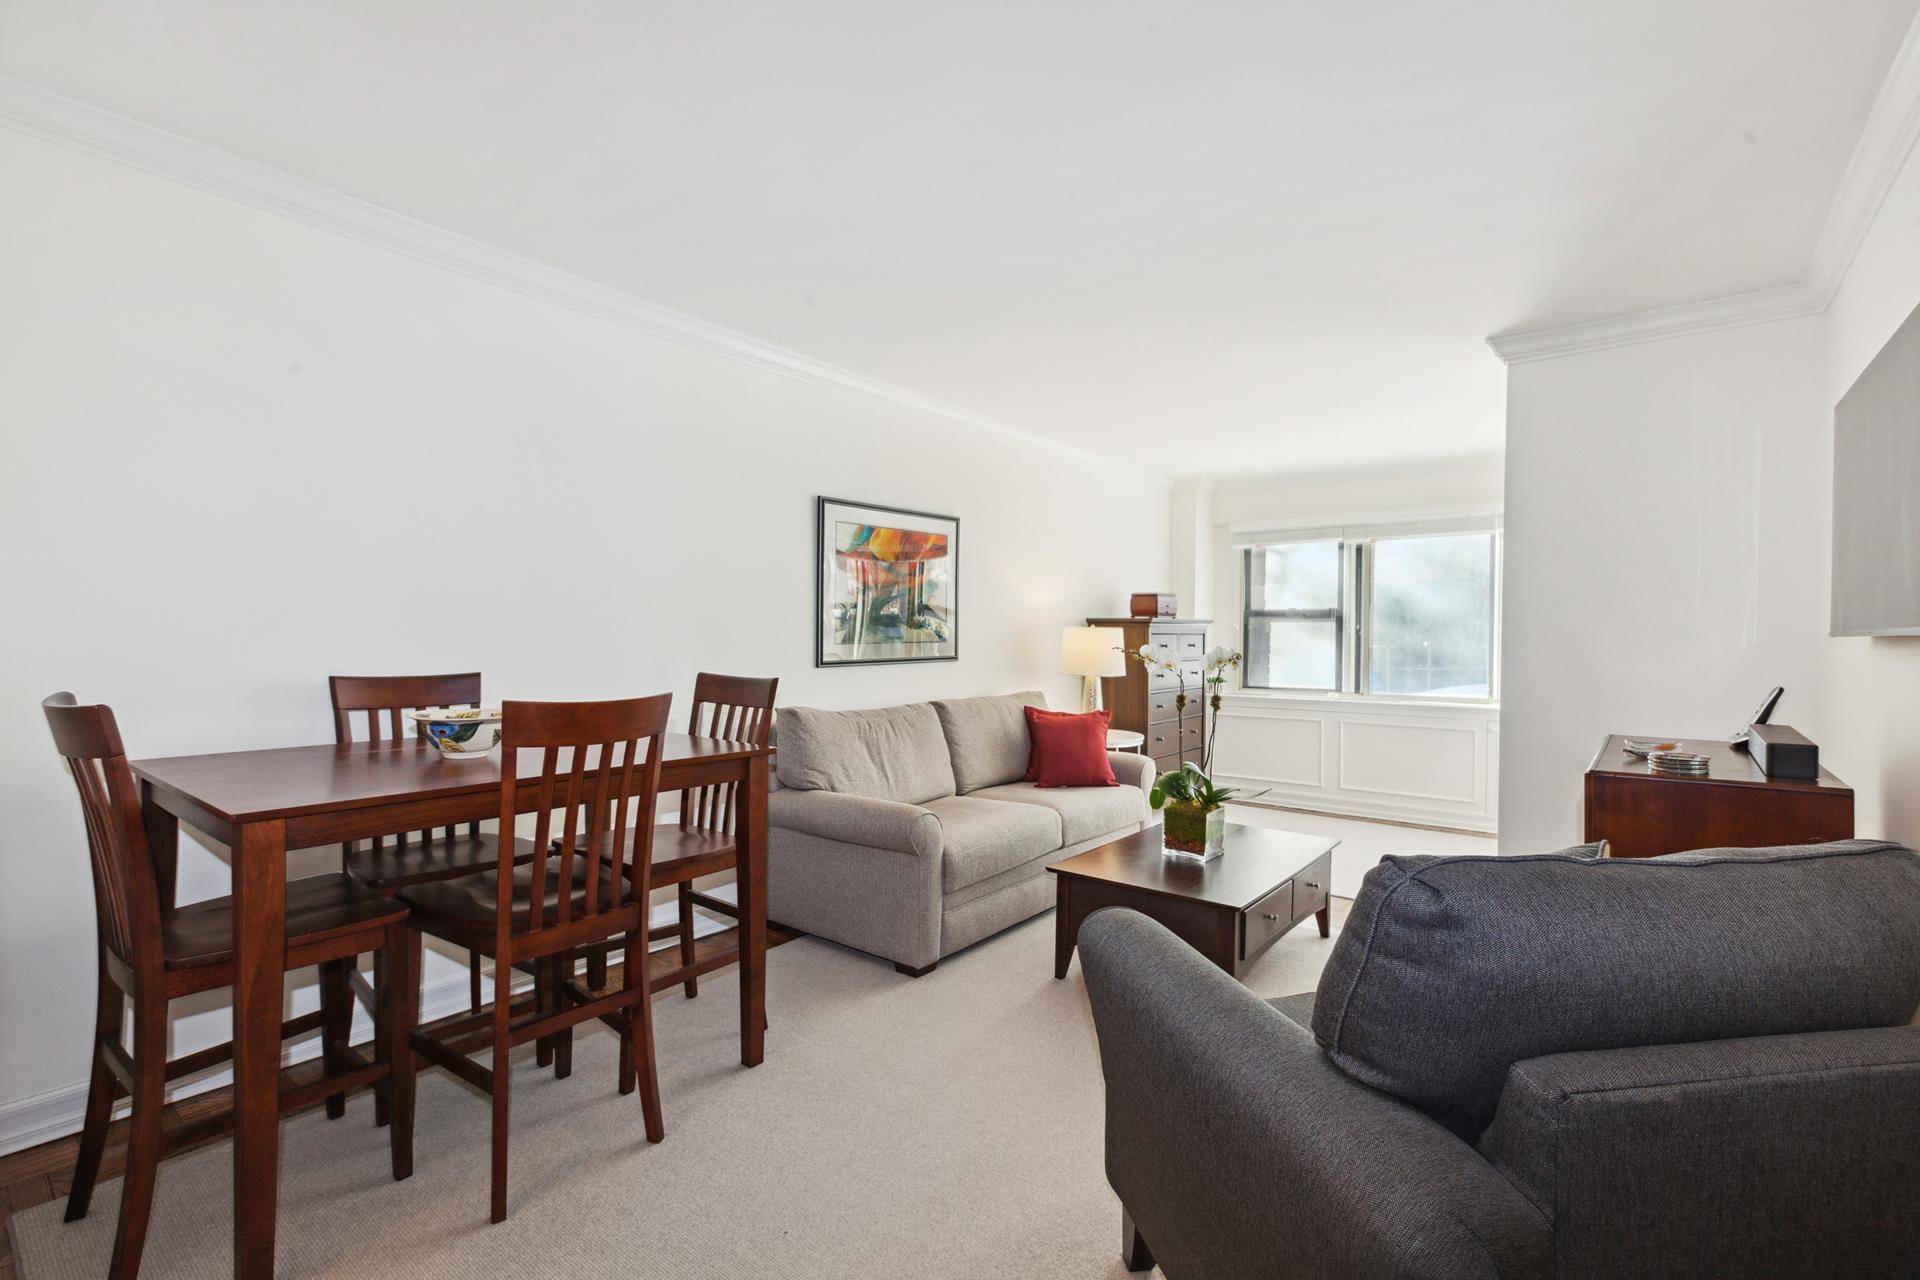 Sunny and South Facing Alcove Studio in Excellent ConditionAn entry foyer welcomes you to this charming and beautifully proportioned apartment.